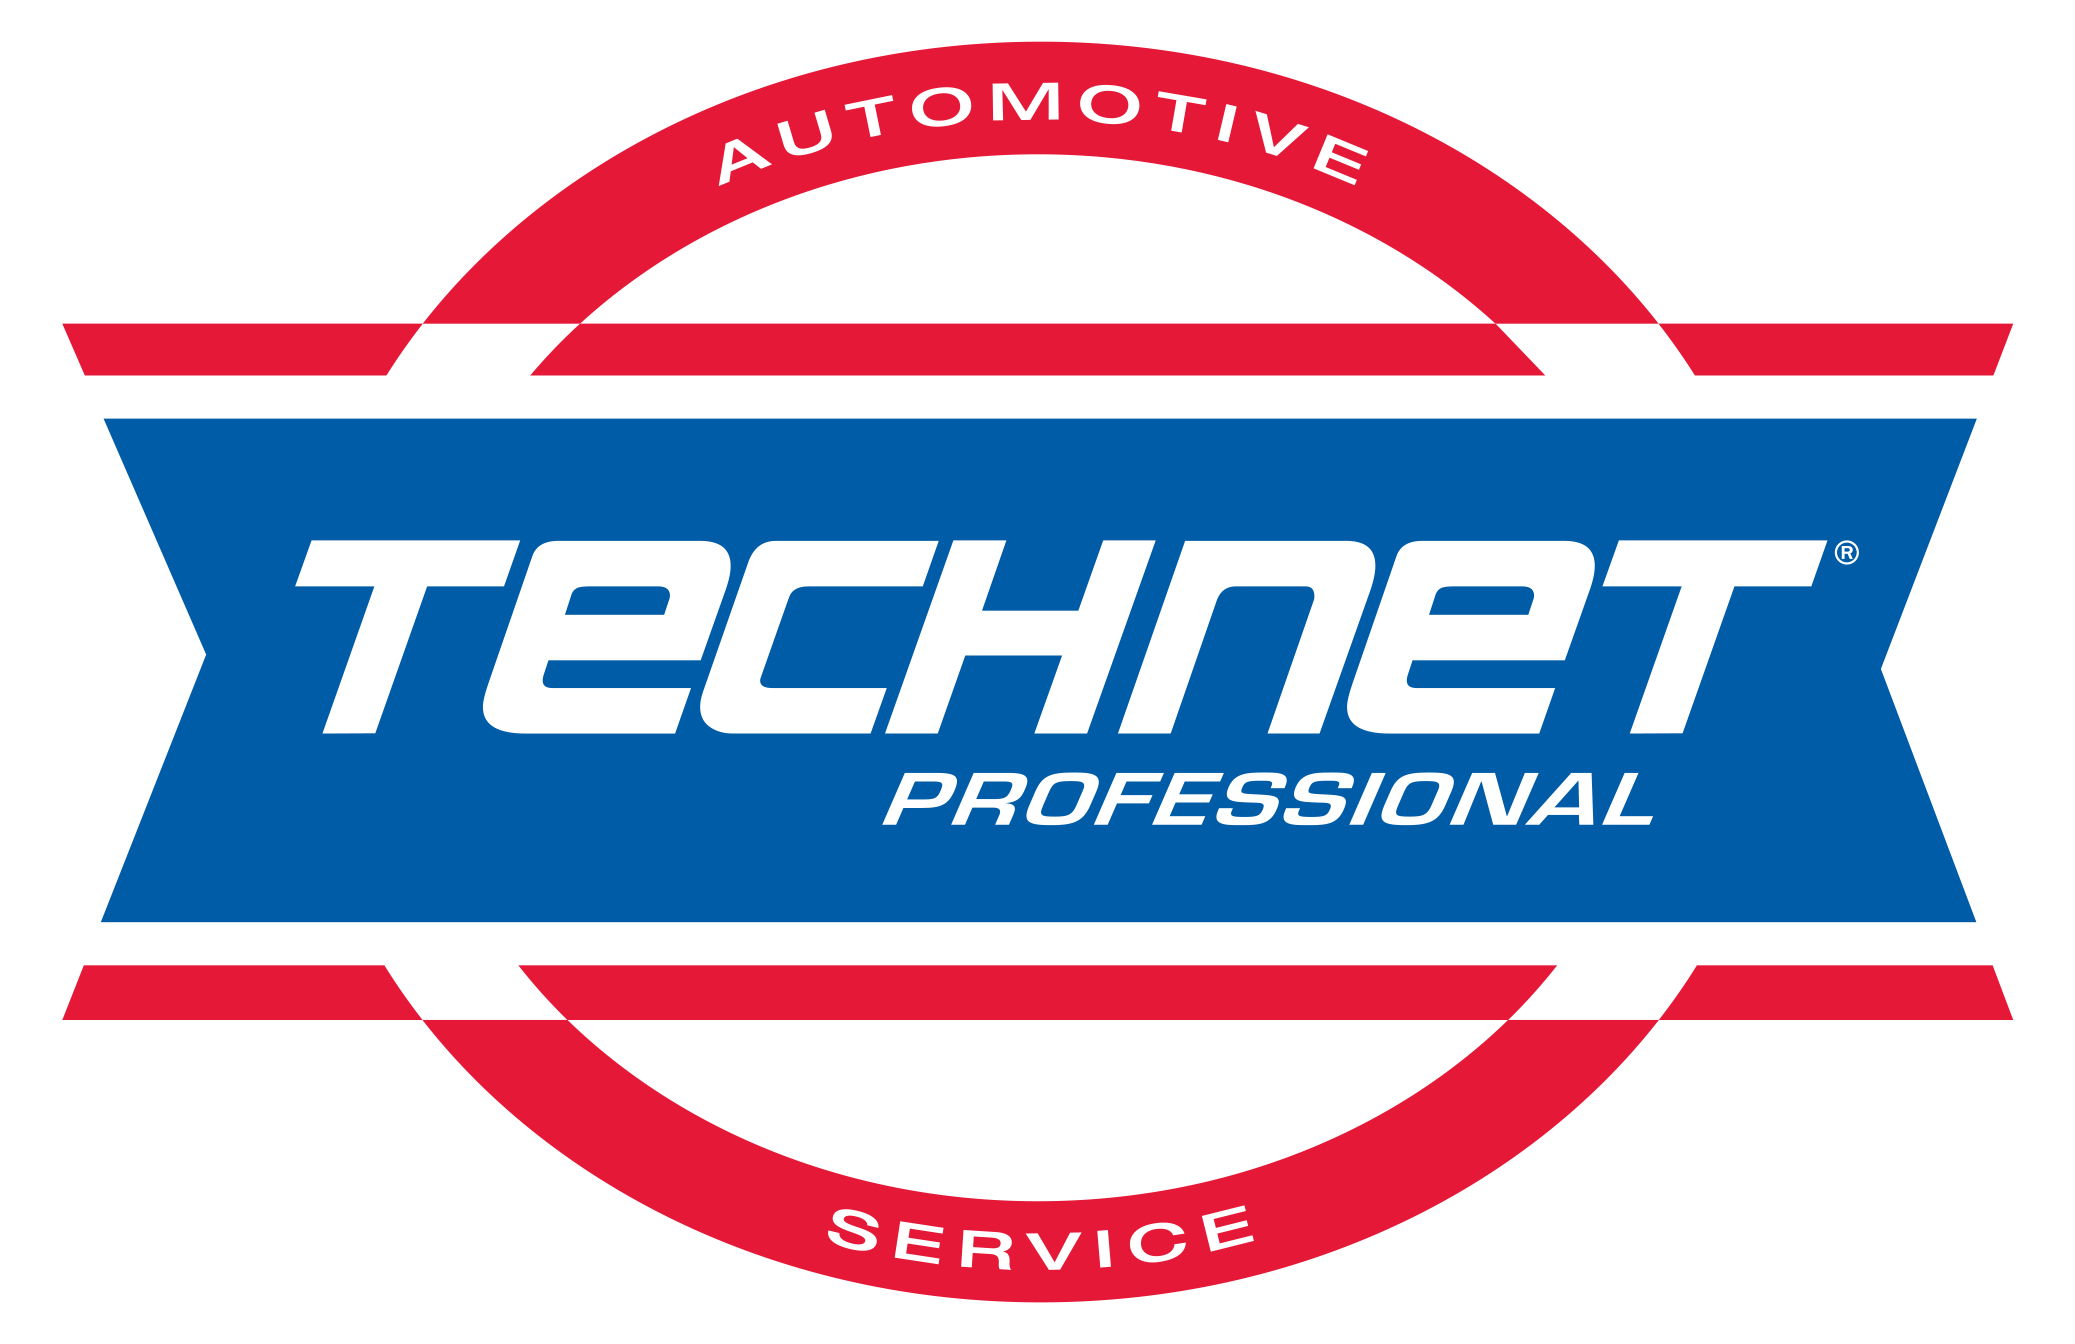 Wisener's Auto Clinic is a Technet Professional Service Center